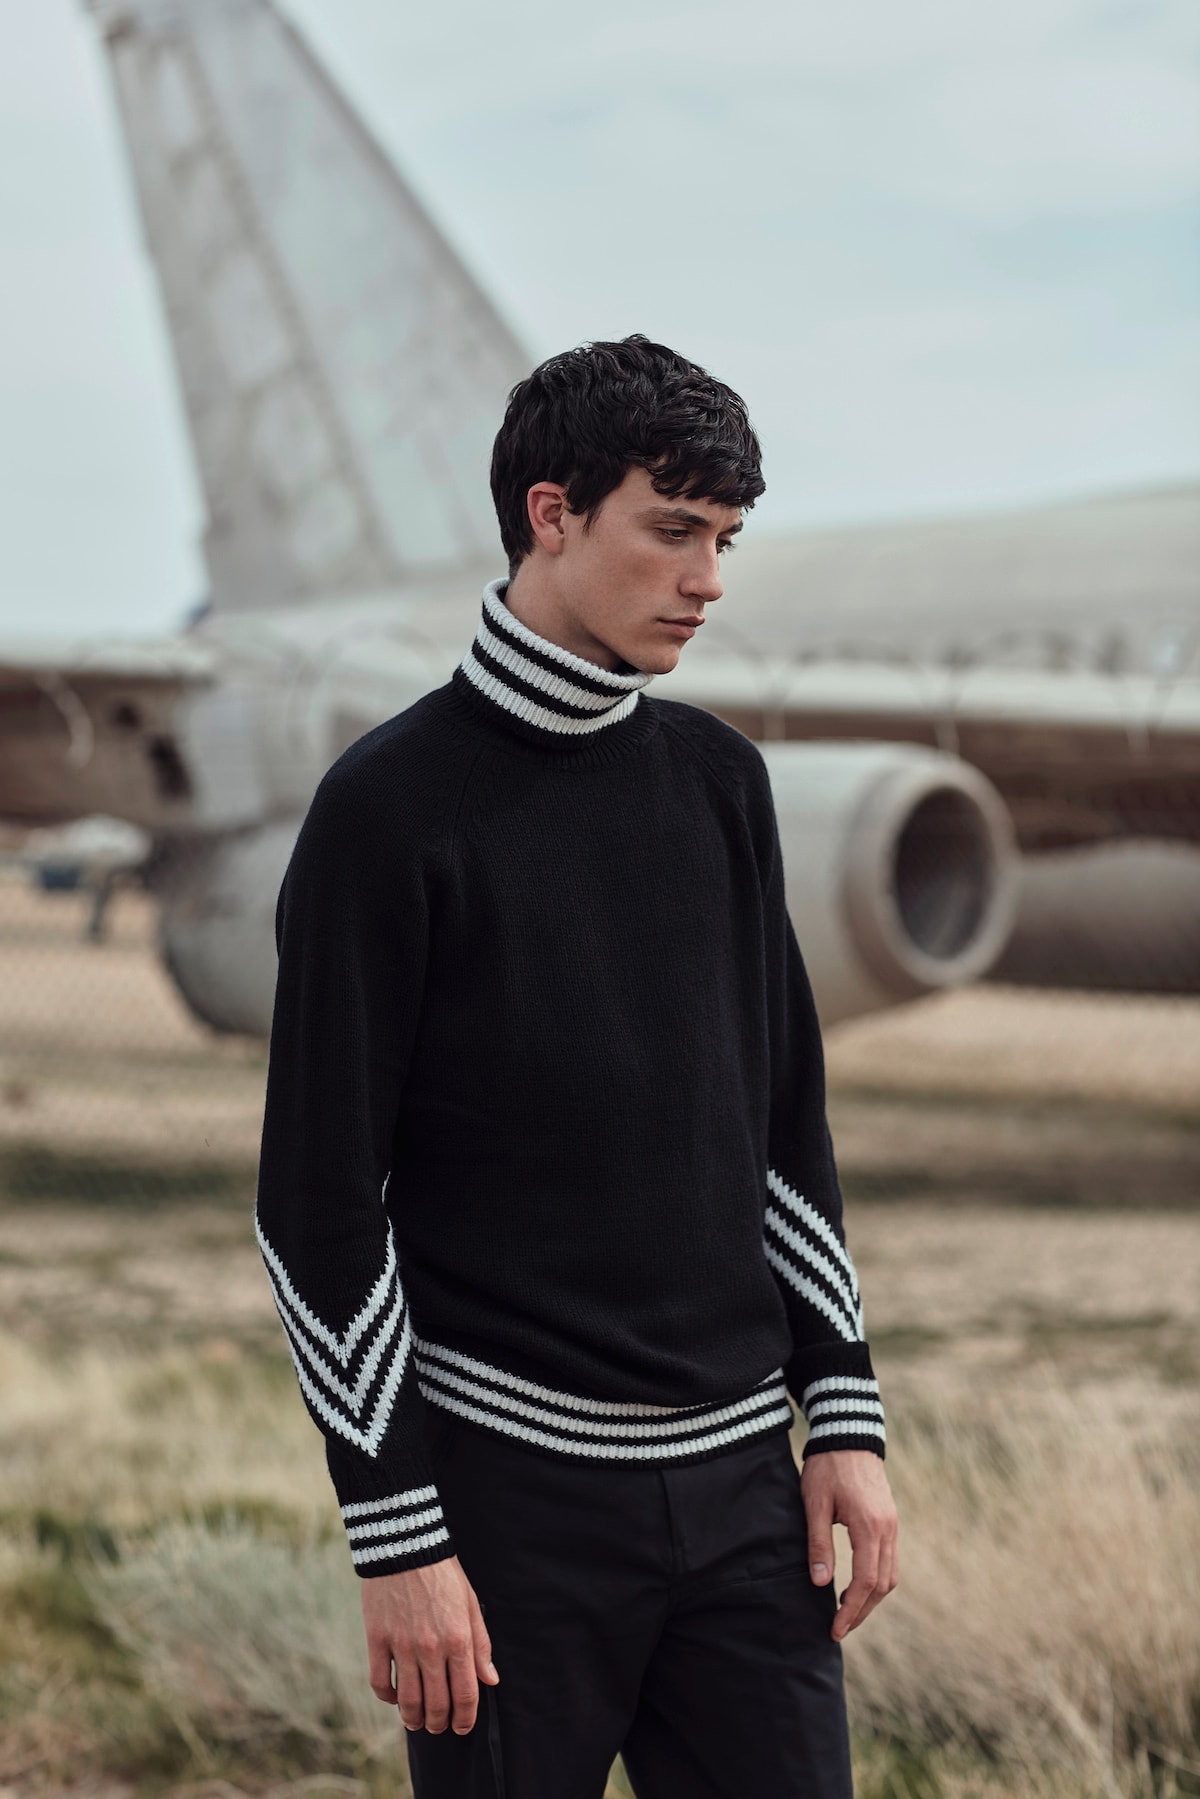 adidas Originals by White Mountaineering 2017 Fall/Winter Second Drop